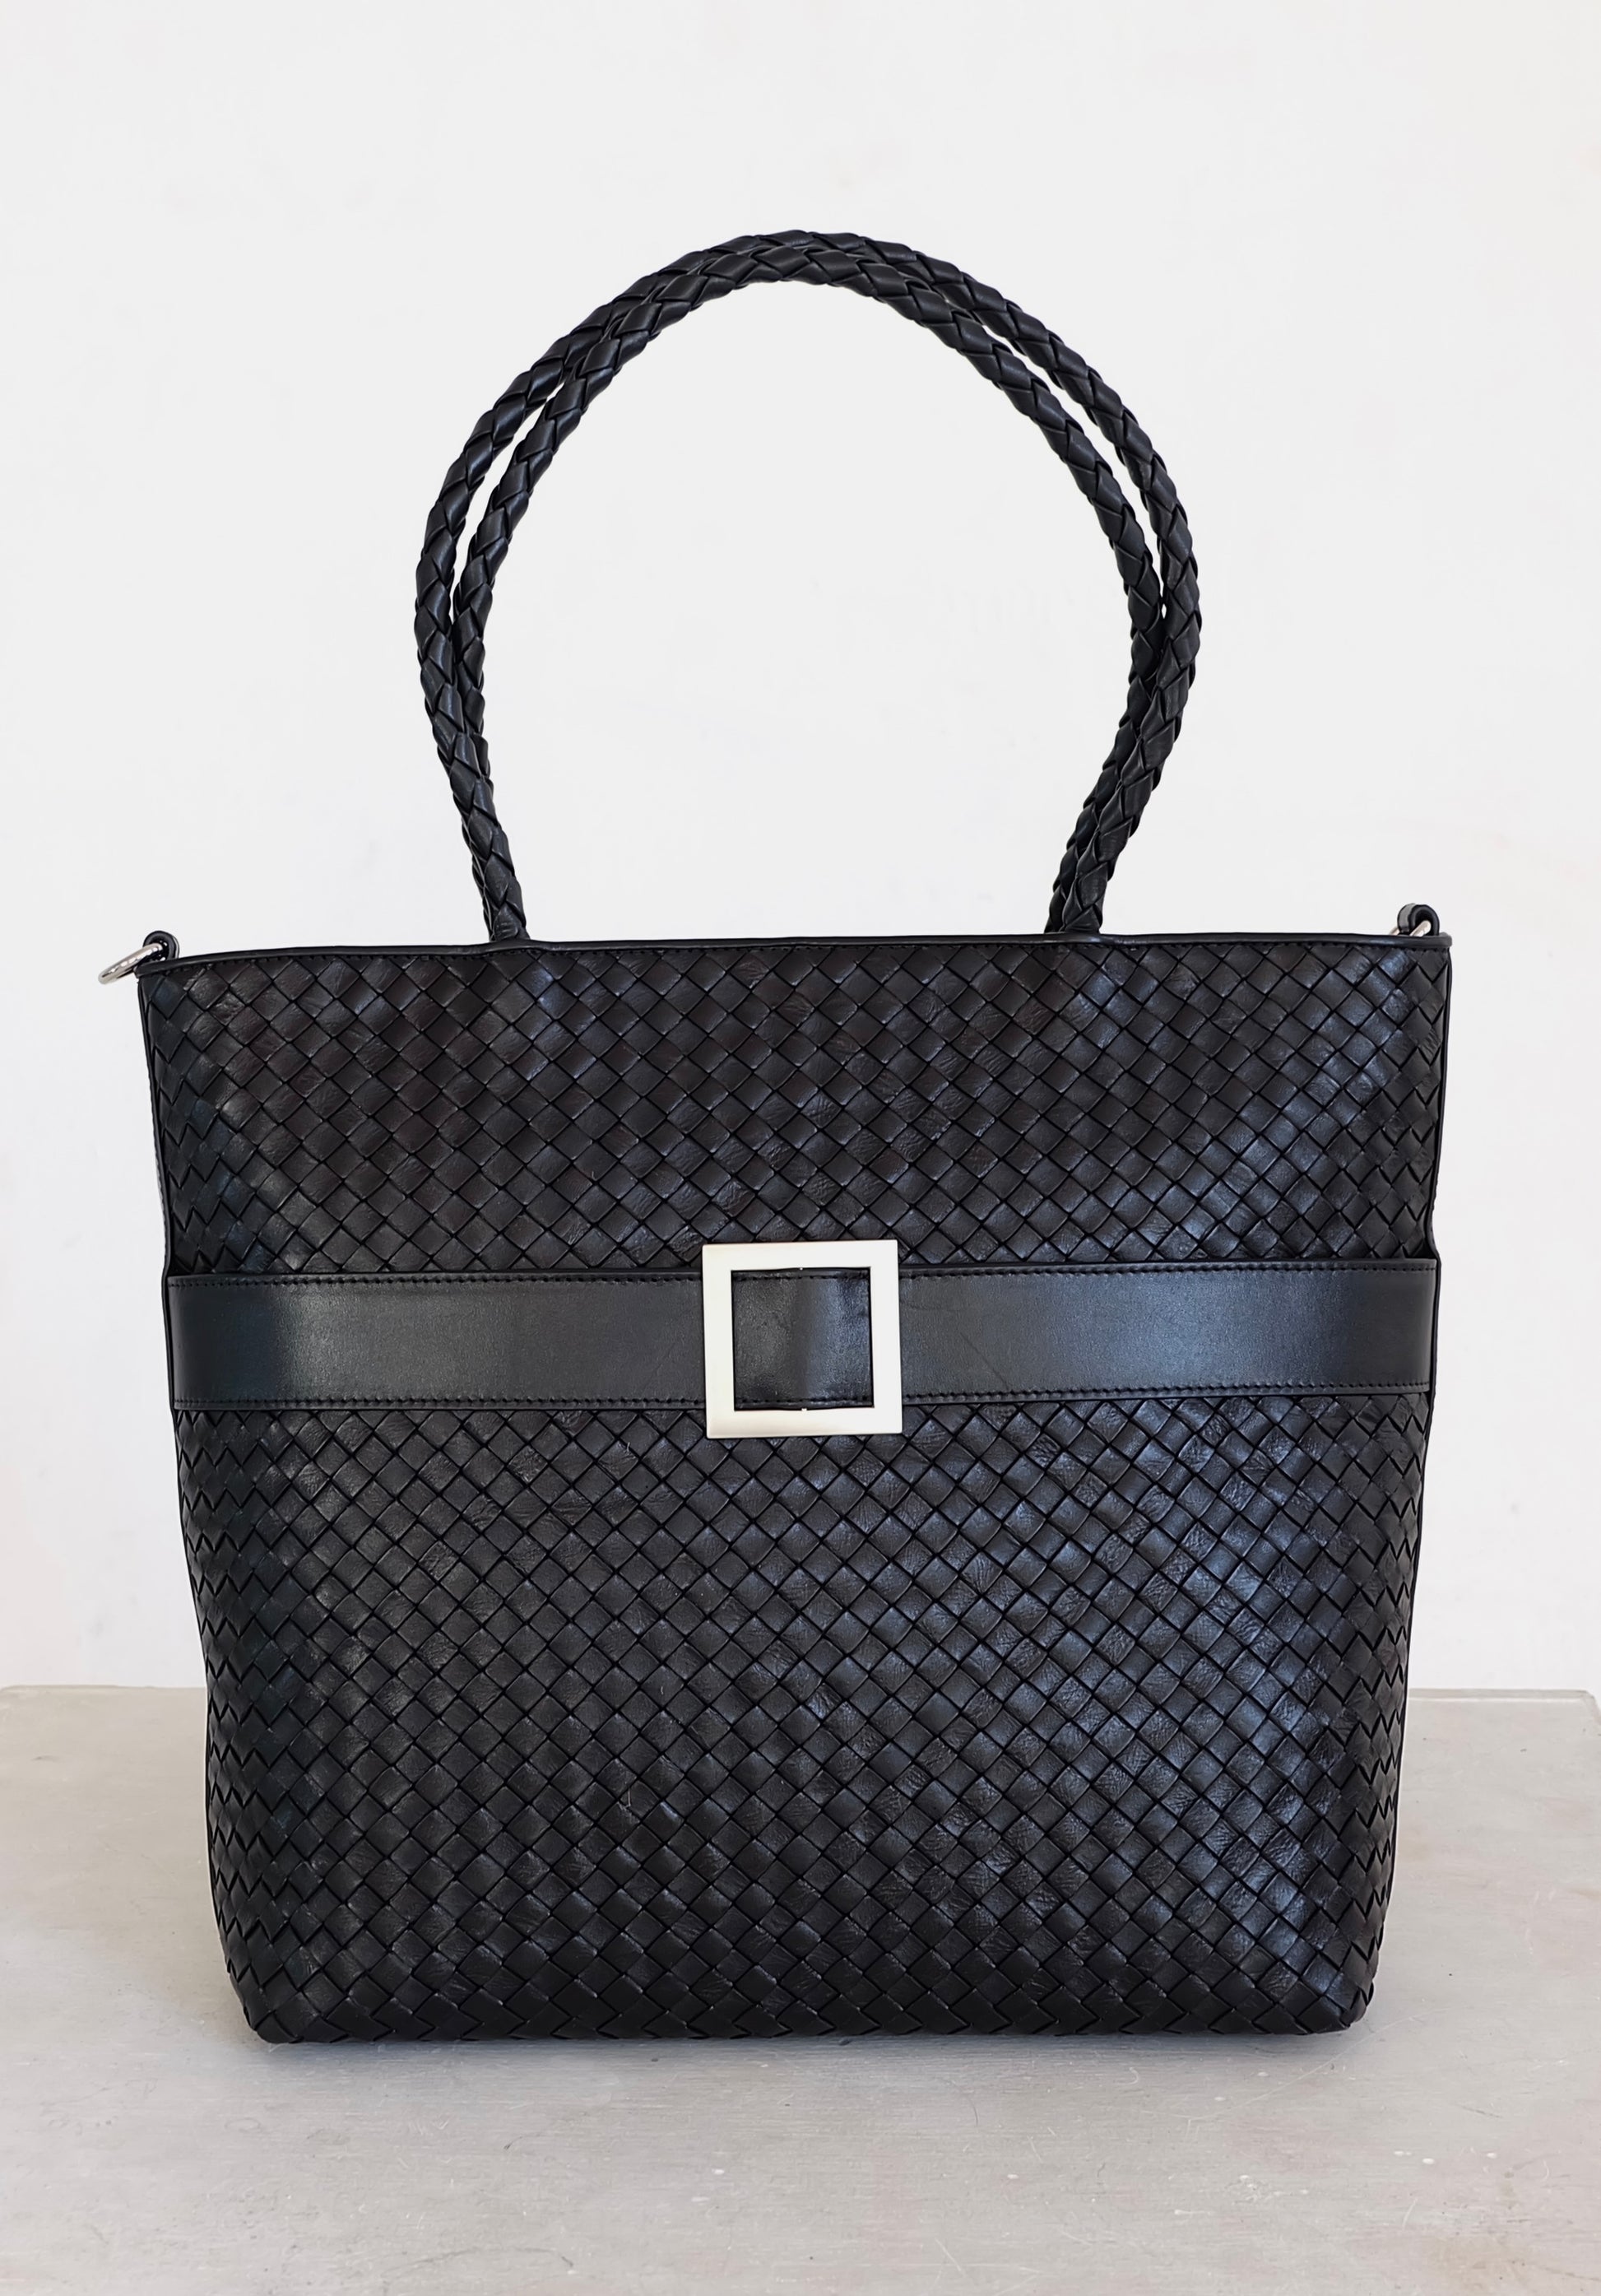 Sustainable Italian leather designer handbag, medium tote and crossbody in charcoal-black. Handbag with accent buckle that is a functional work of art.